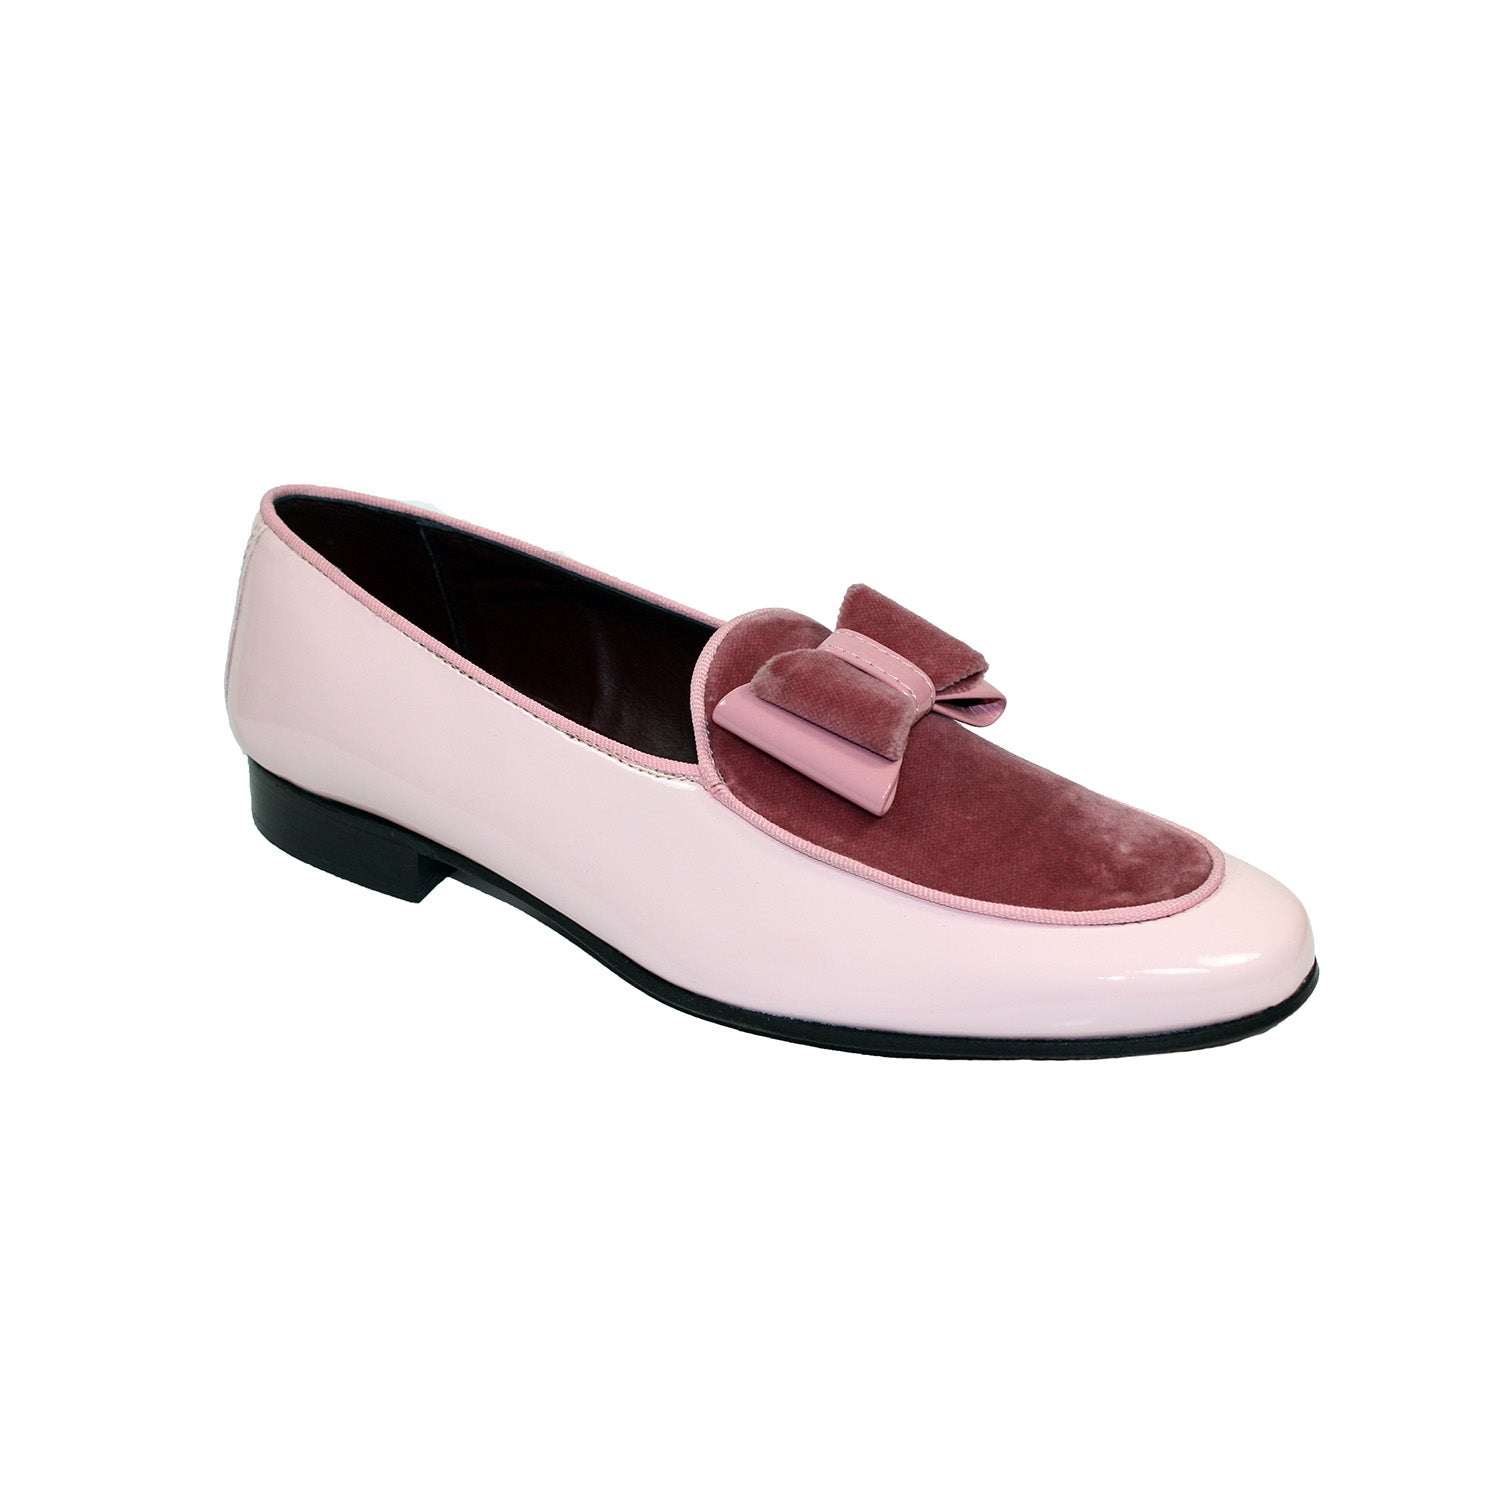 Duca Men's Shoes Pink Patent Leather-Velvet, Leather Lining For – AmbrogioShoes